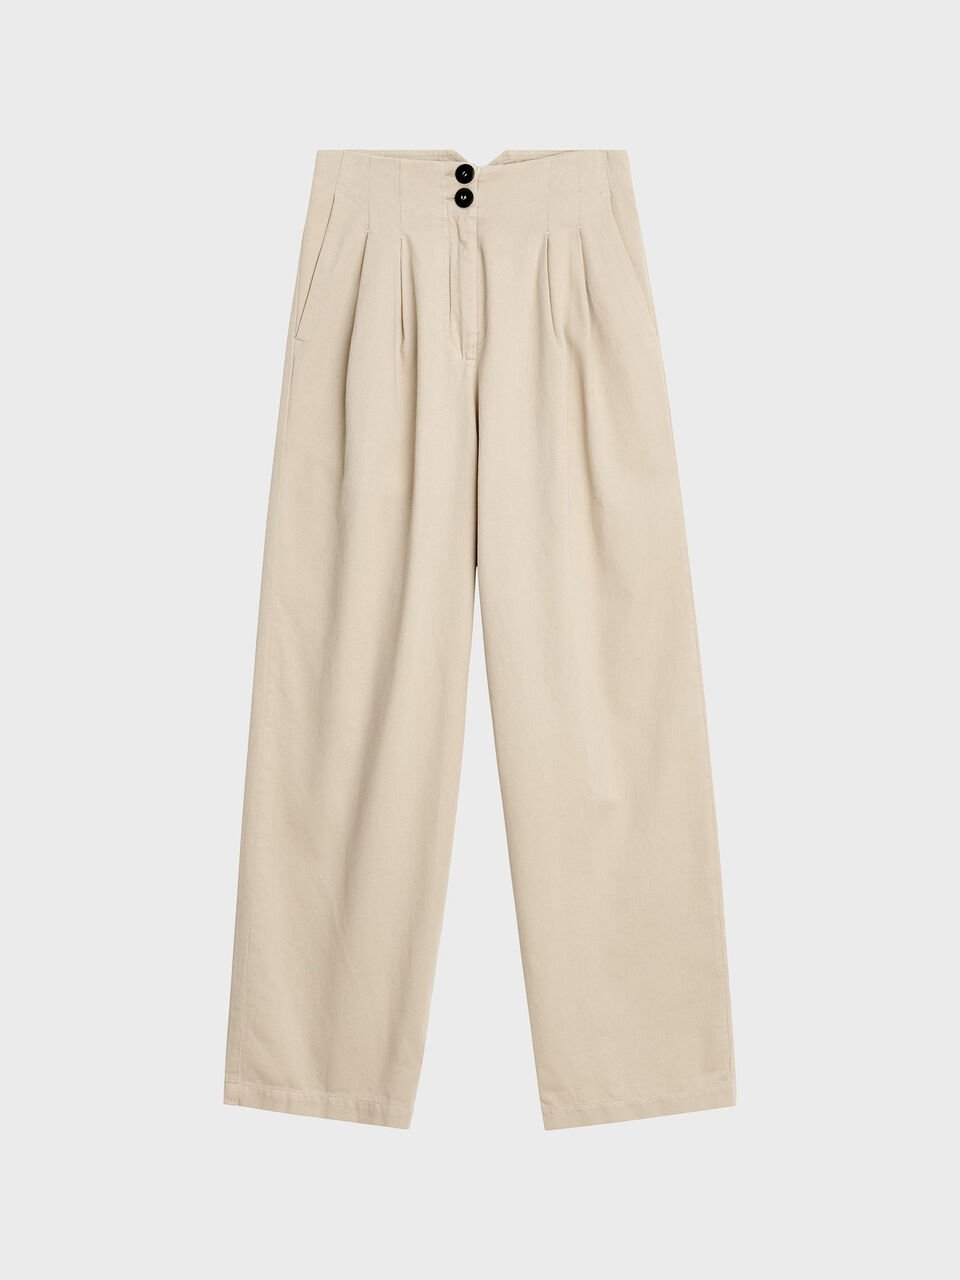 beige tailored pants with four pleating details and two black button on the front